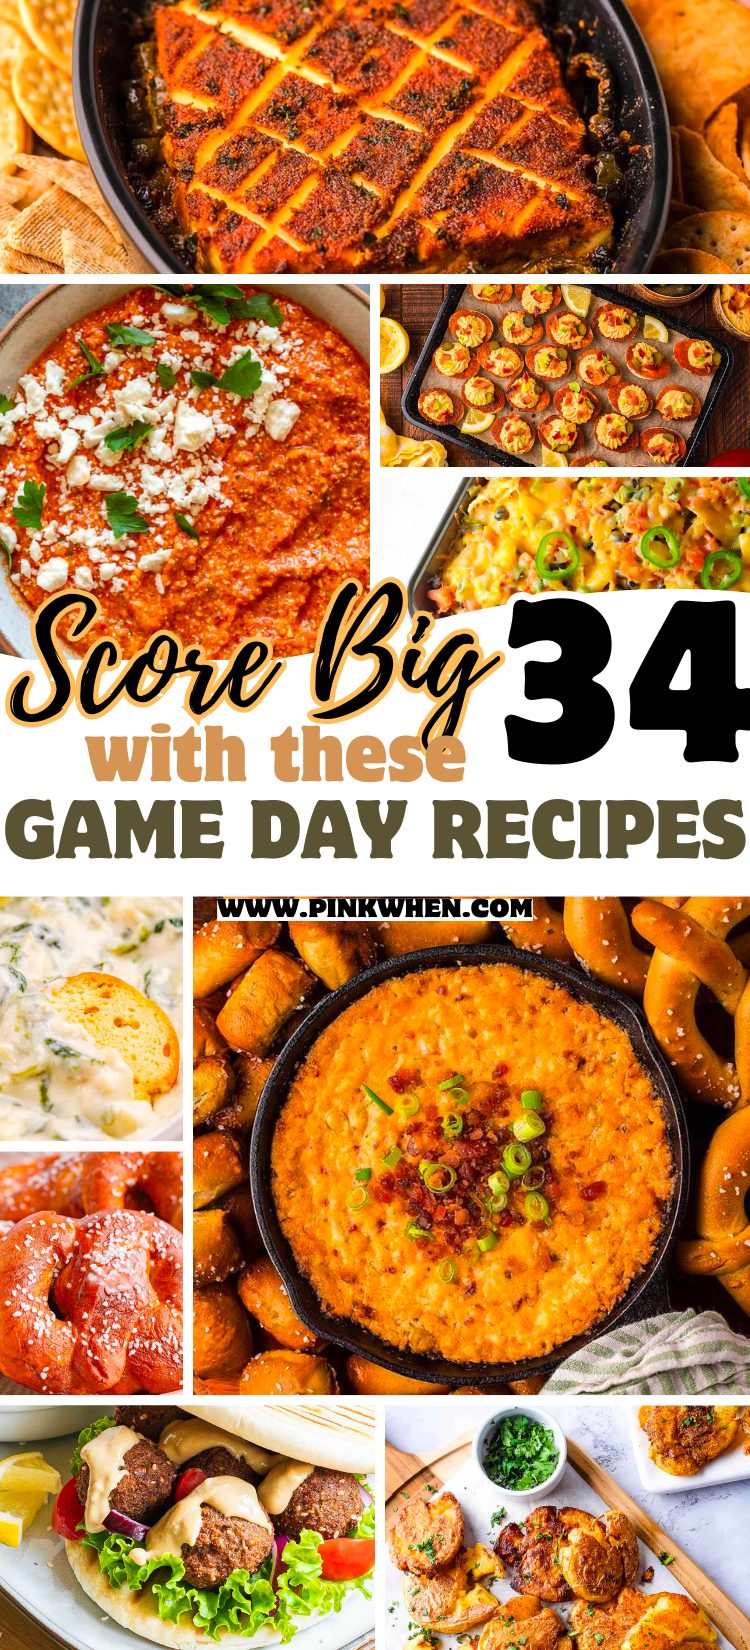 Score Big with These 35 Game Day Recipes